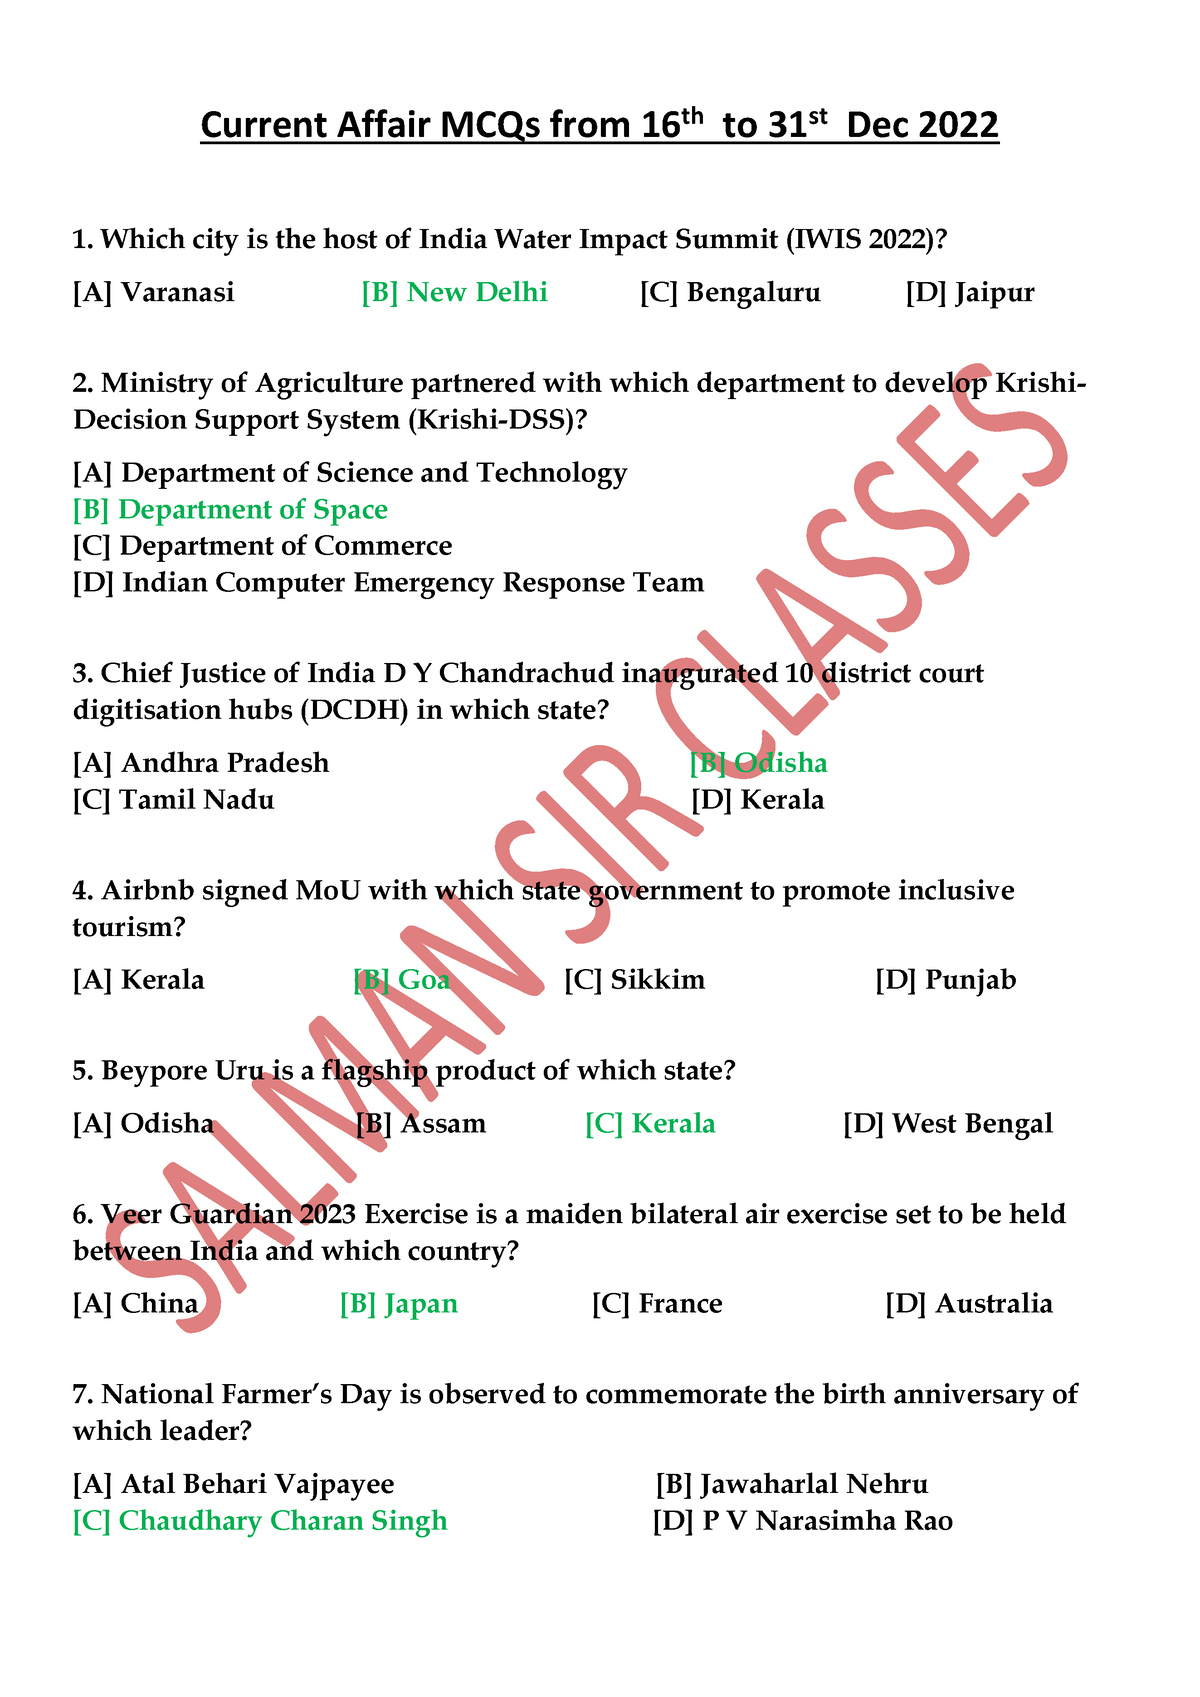 Current Affairs Mcqs 16th To 31st Dec 22 Current Affair Mcqs From 16th To 31st Dec 2022 1543